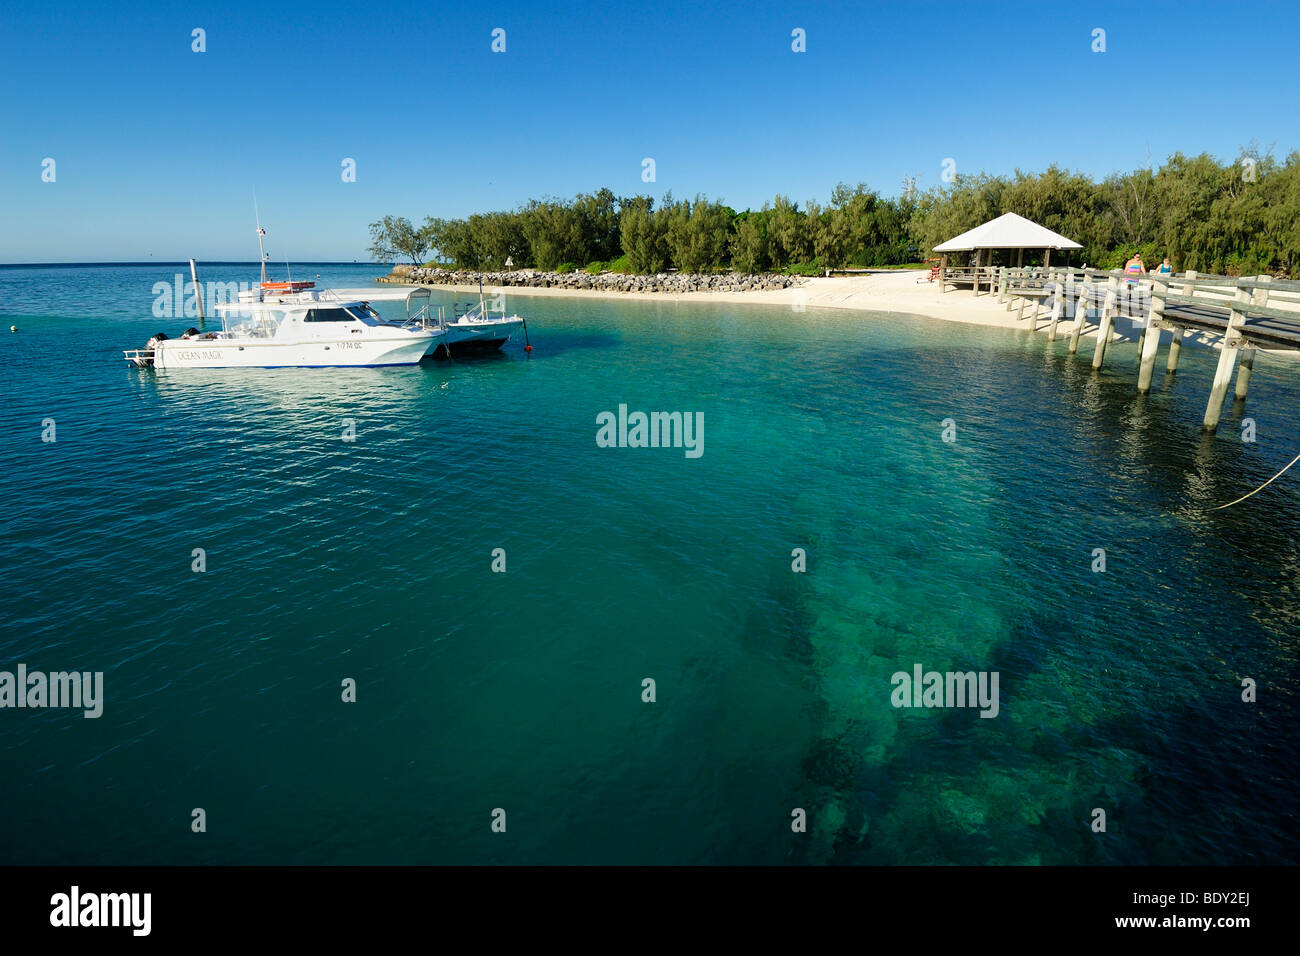 Boat jetty on Heron Island, Capricornia Cays National Park, Great Barrier Reef, Queensland, Australia Stock Photo